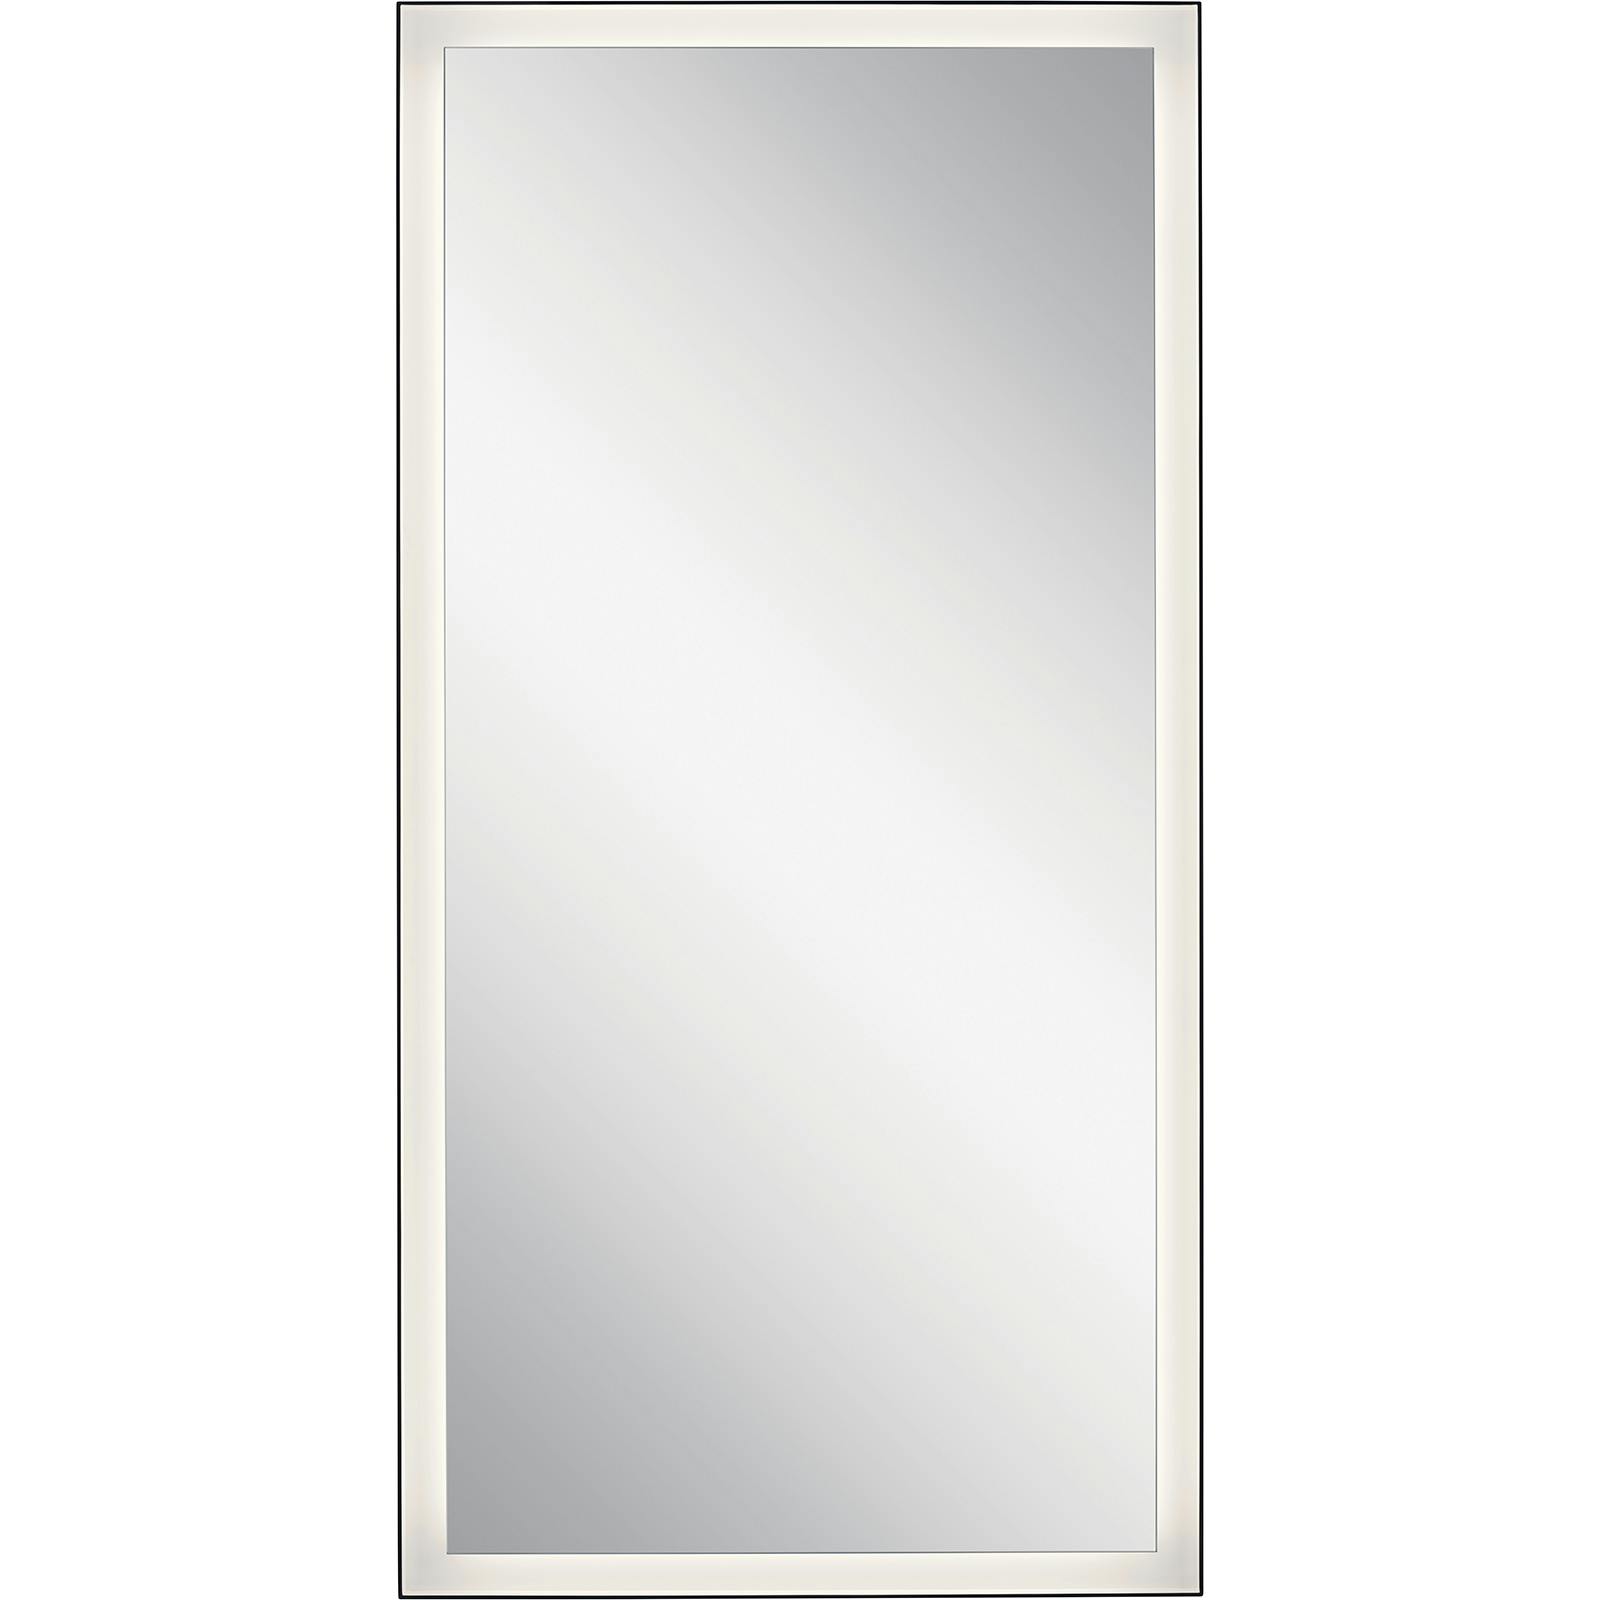 Front view of the Ryame™ 30" Lighted Mirror Black on a white background